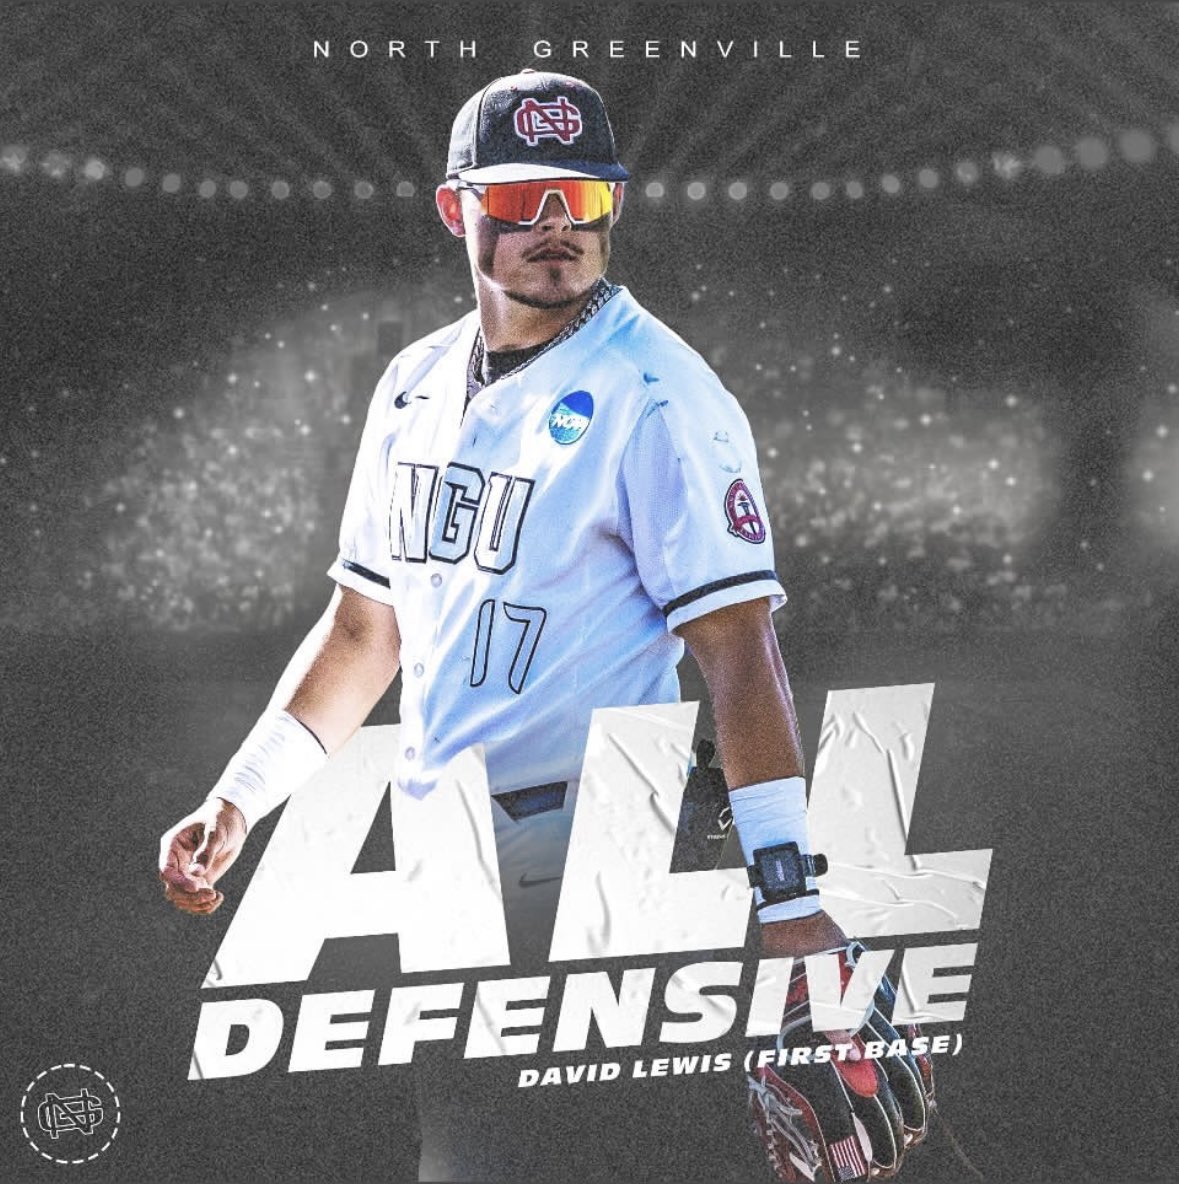 David Lewis and Pat Monteith have been named All Defensive Team award winners‼️ @MonteithPat @David_lewis0724